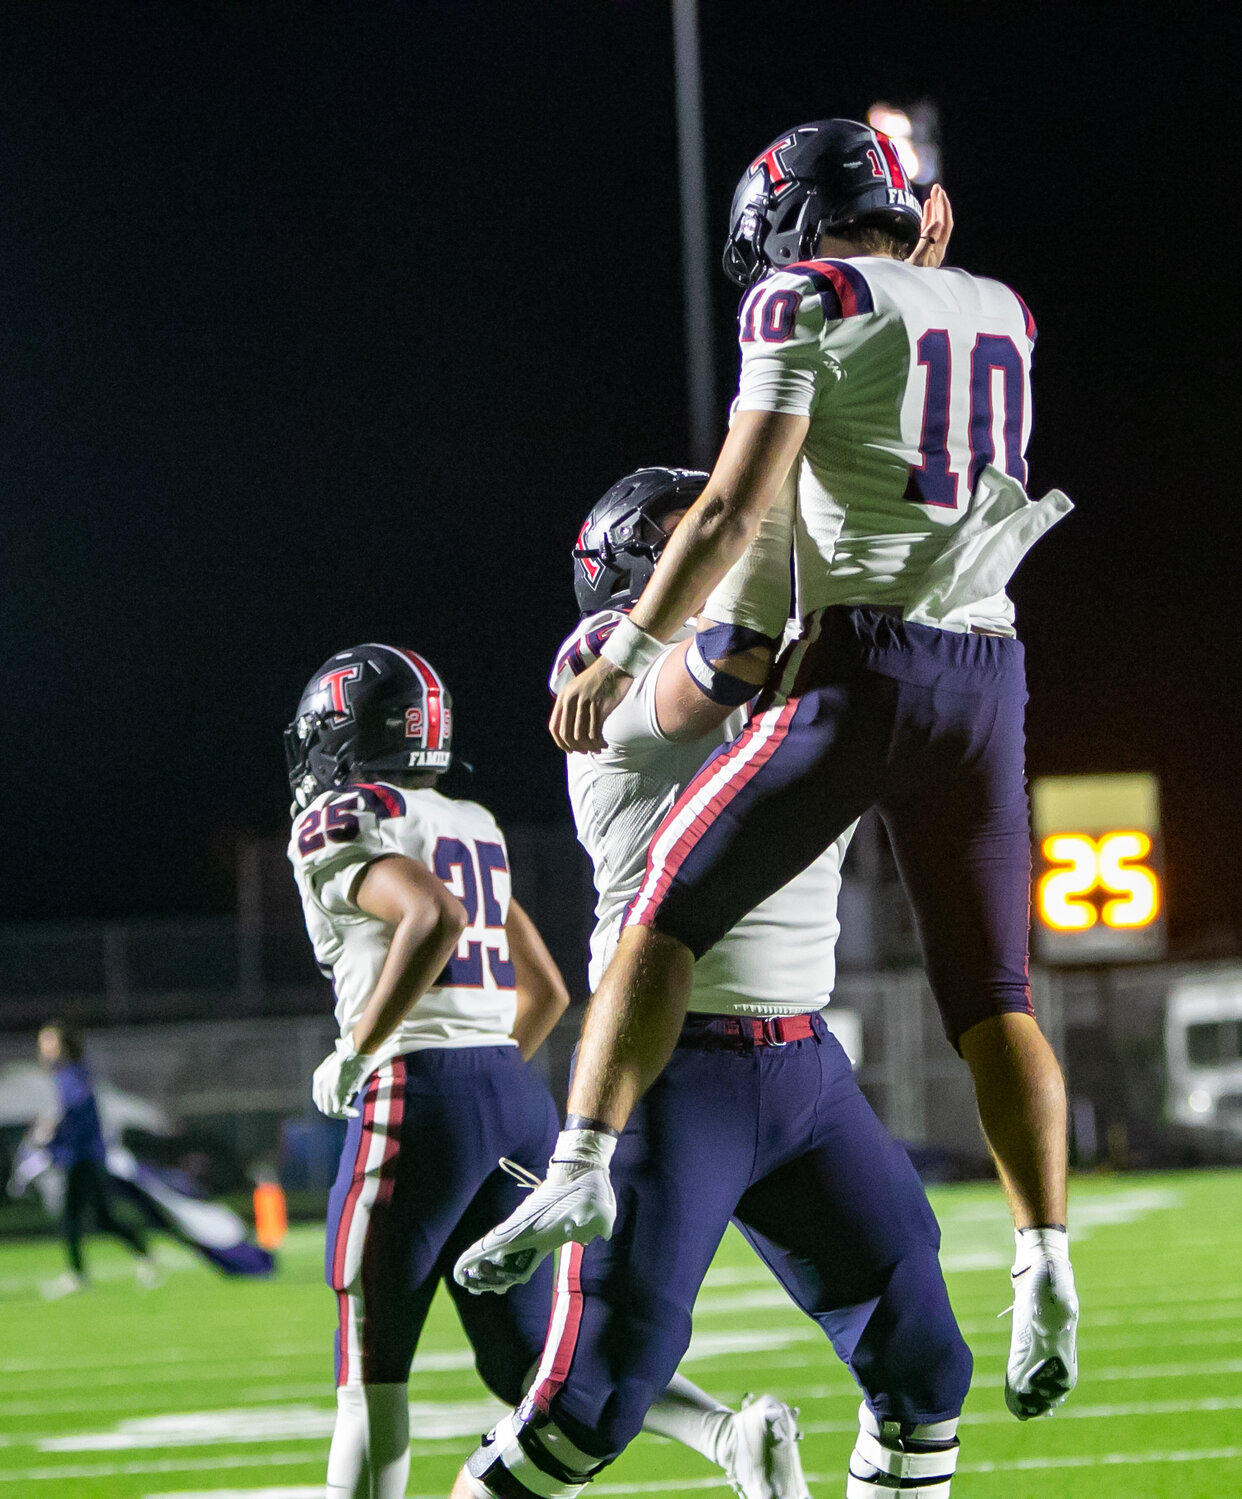 Wyatt Young is lifted up after a touchdown during Friday's game between Tompkins and Ridge Point at Hall Stadium.